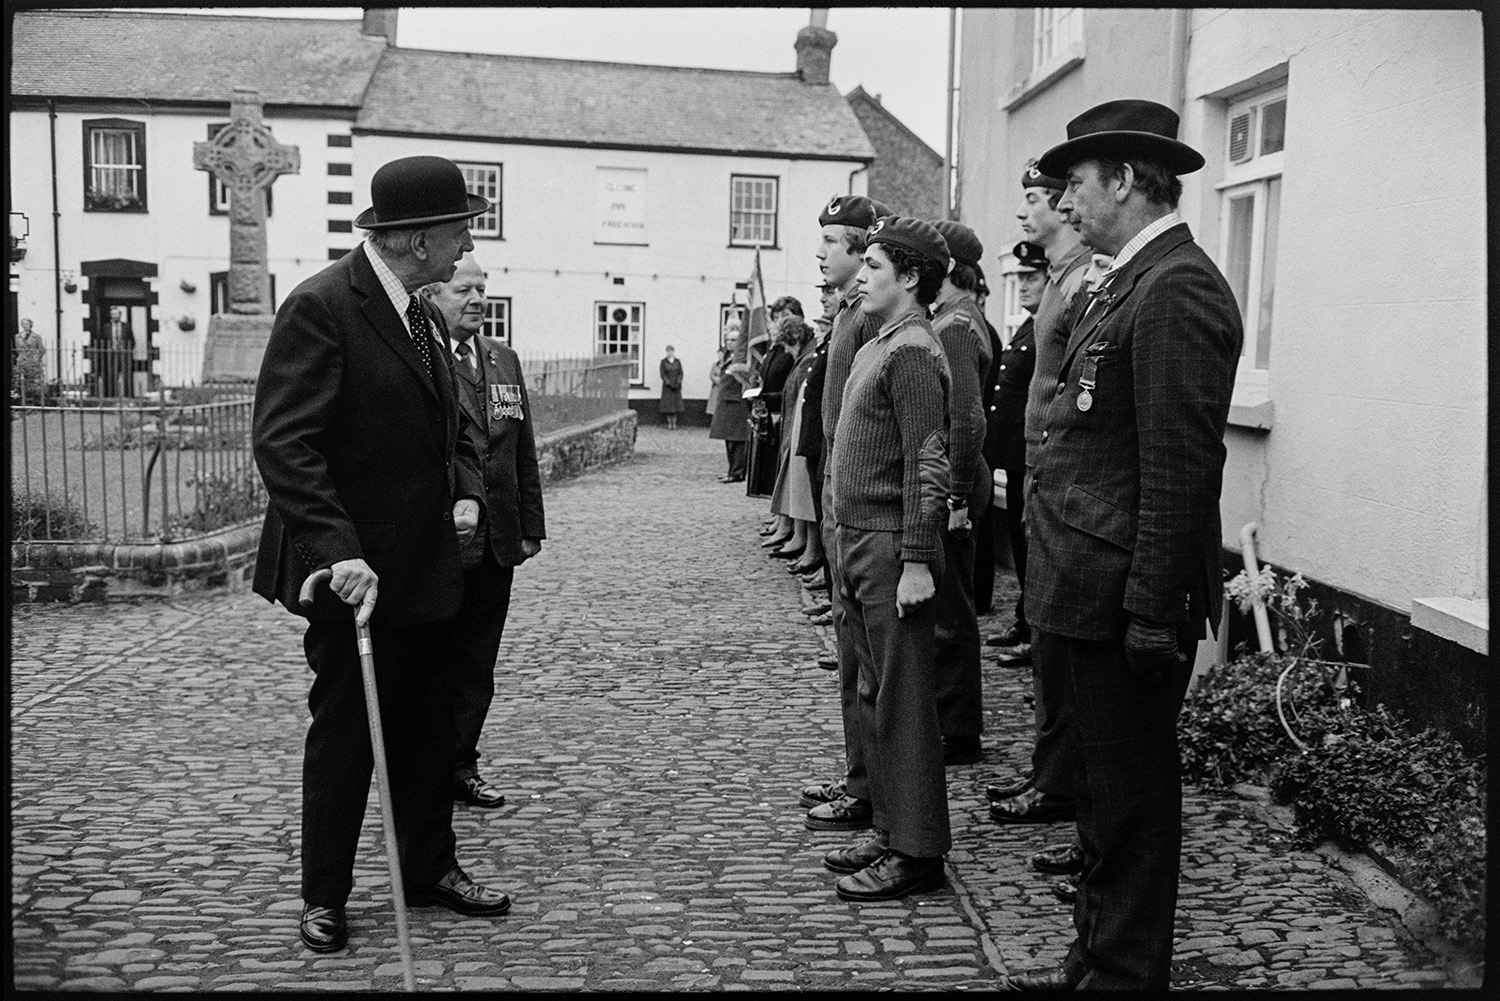 Armistice Day, inspection and parade to church, both women and men. Scouts and brownies. 
[Two men, one wearing medals and another wearing a bowler hat and using a walking stick, inspecting cadets lined up on a cobbled street by Chulmleigh war memorial on Remembrance Day.]